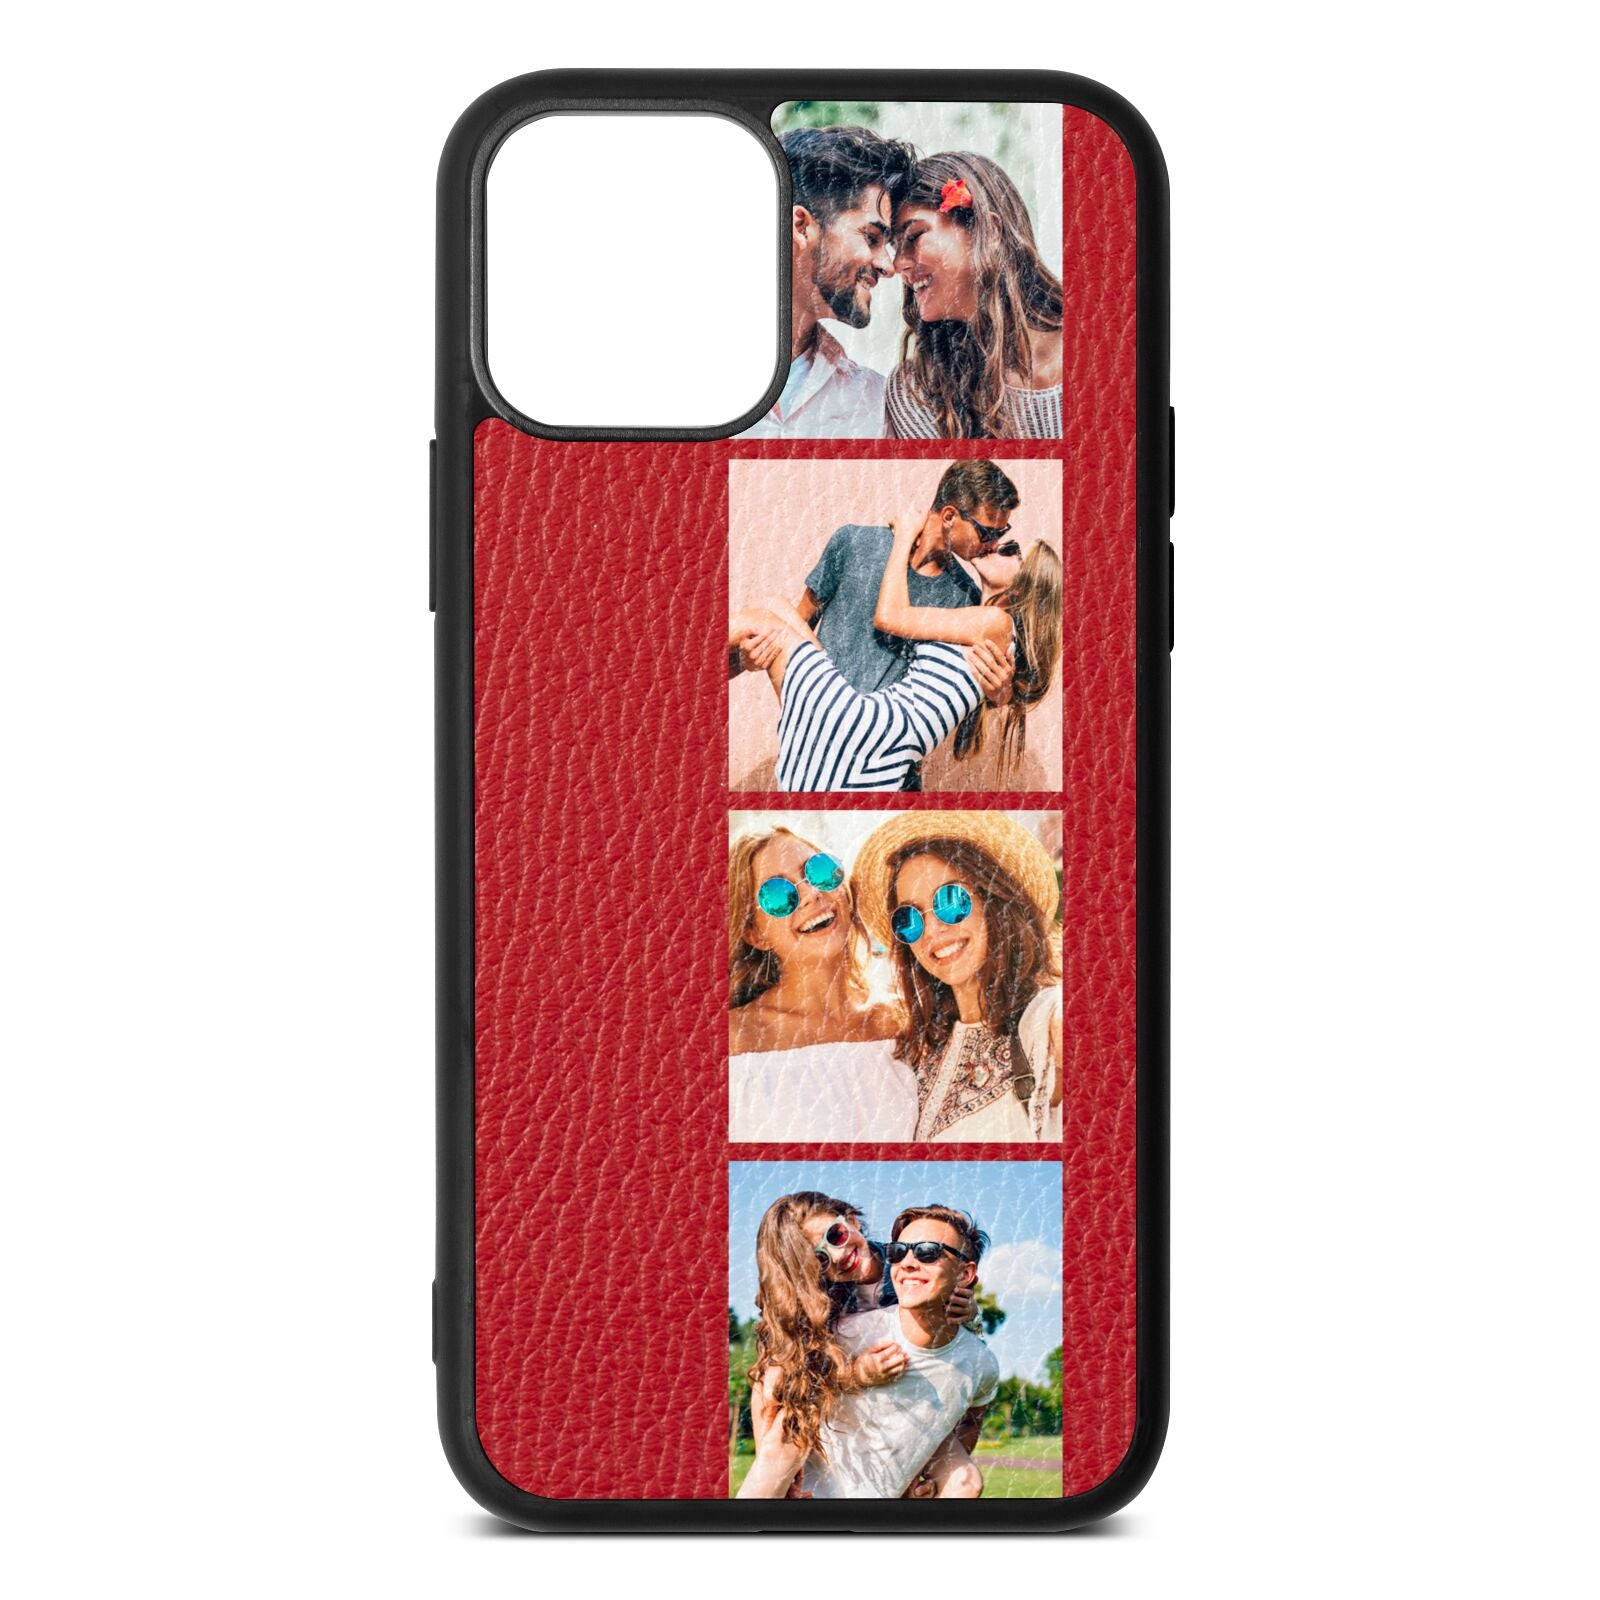 Photo Strip Montage Upload Red Pebble Leather iPhone 11 Case